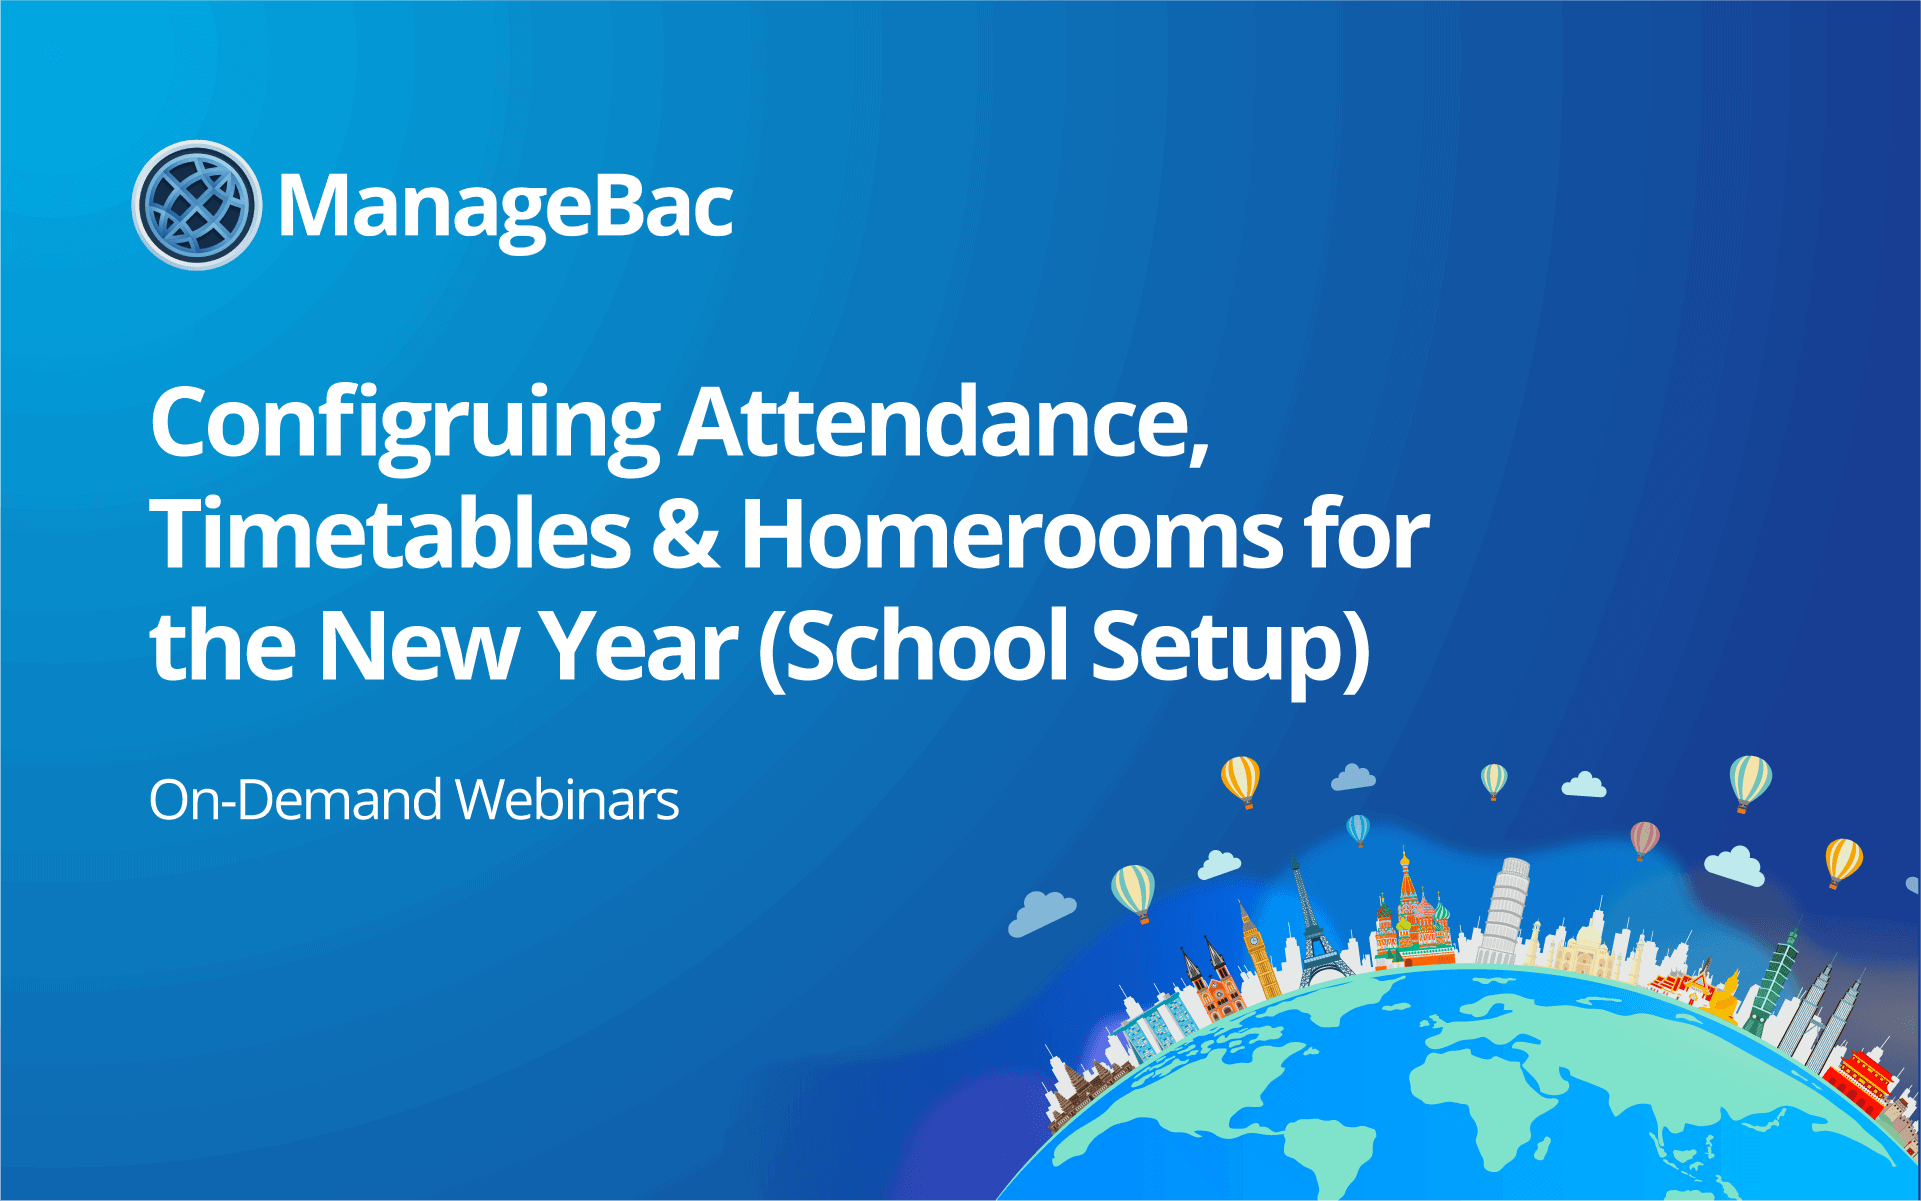 Configuring Attendance, Timetables & Homerooms for the new year (School Setup)